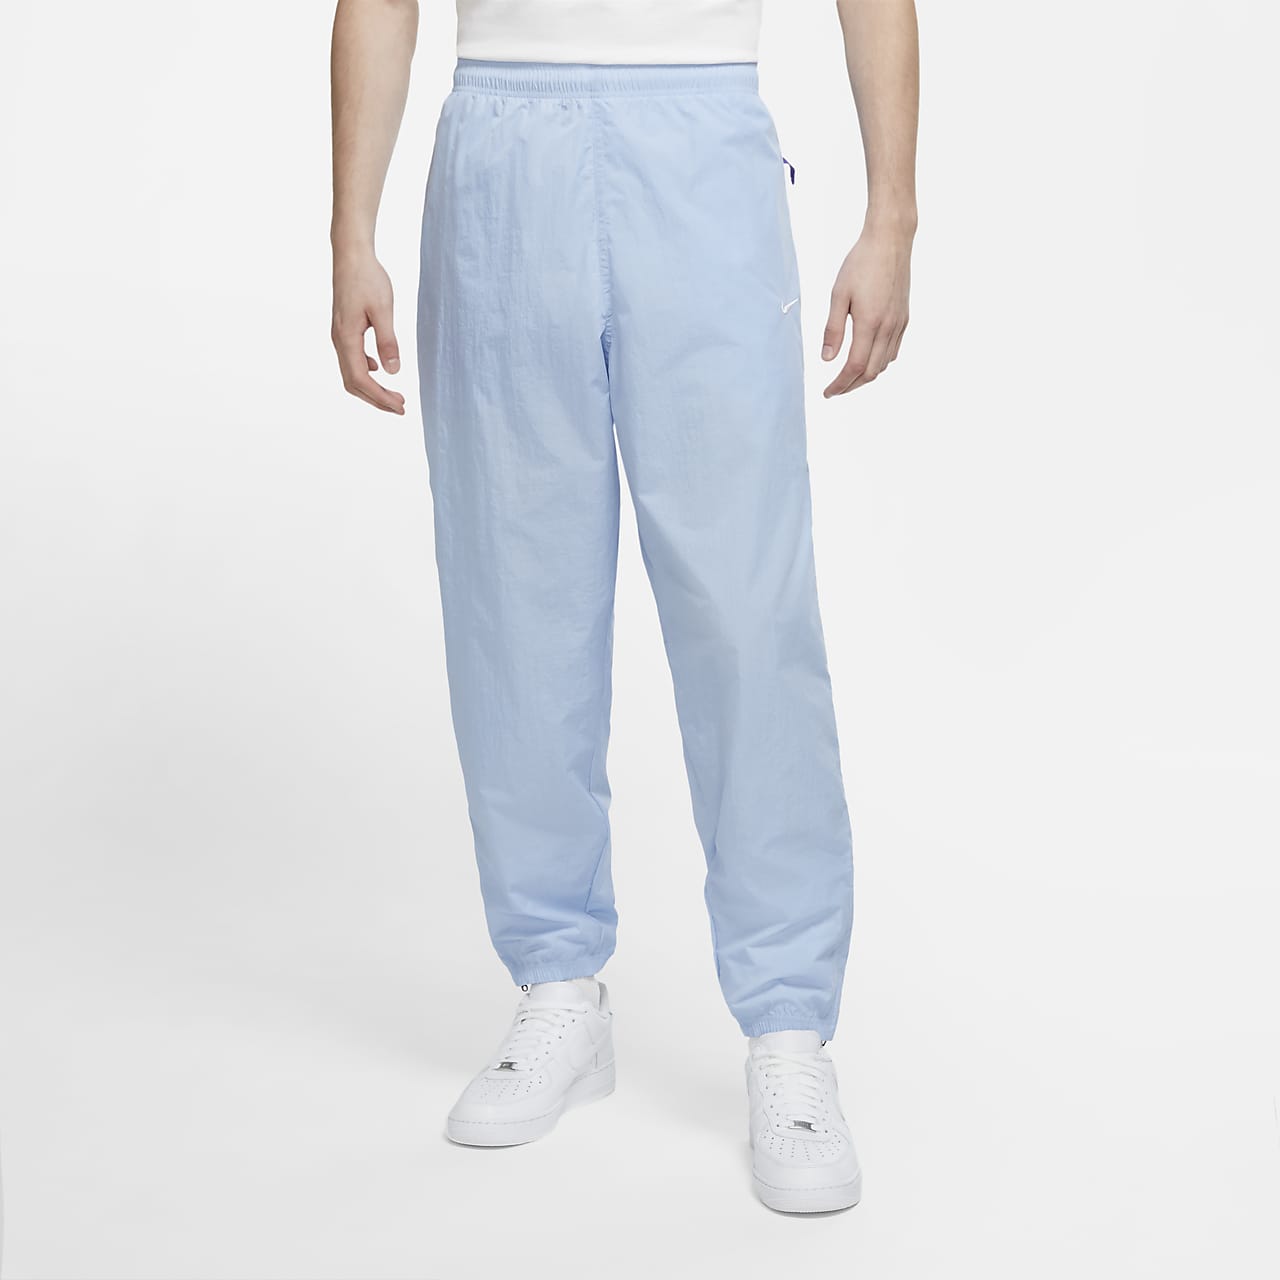 track pants online shopping